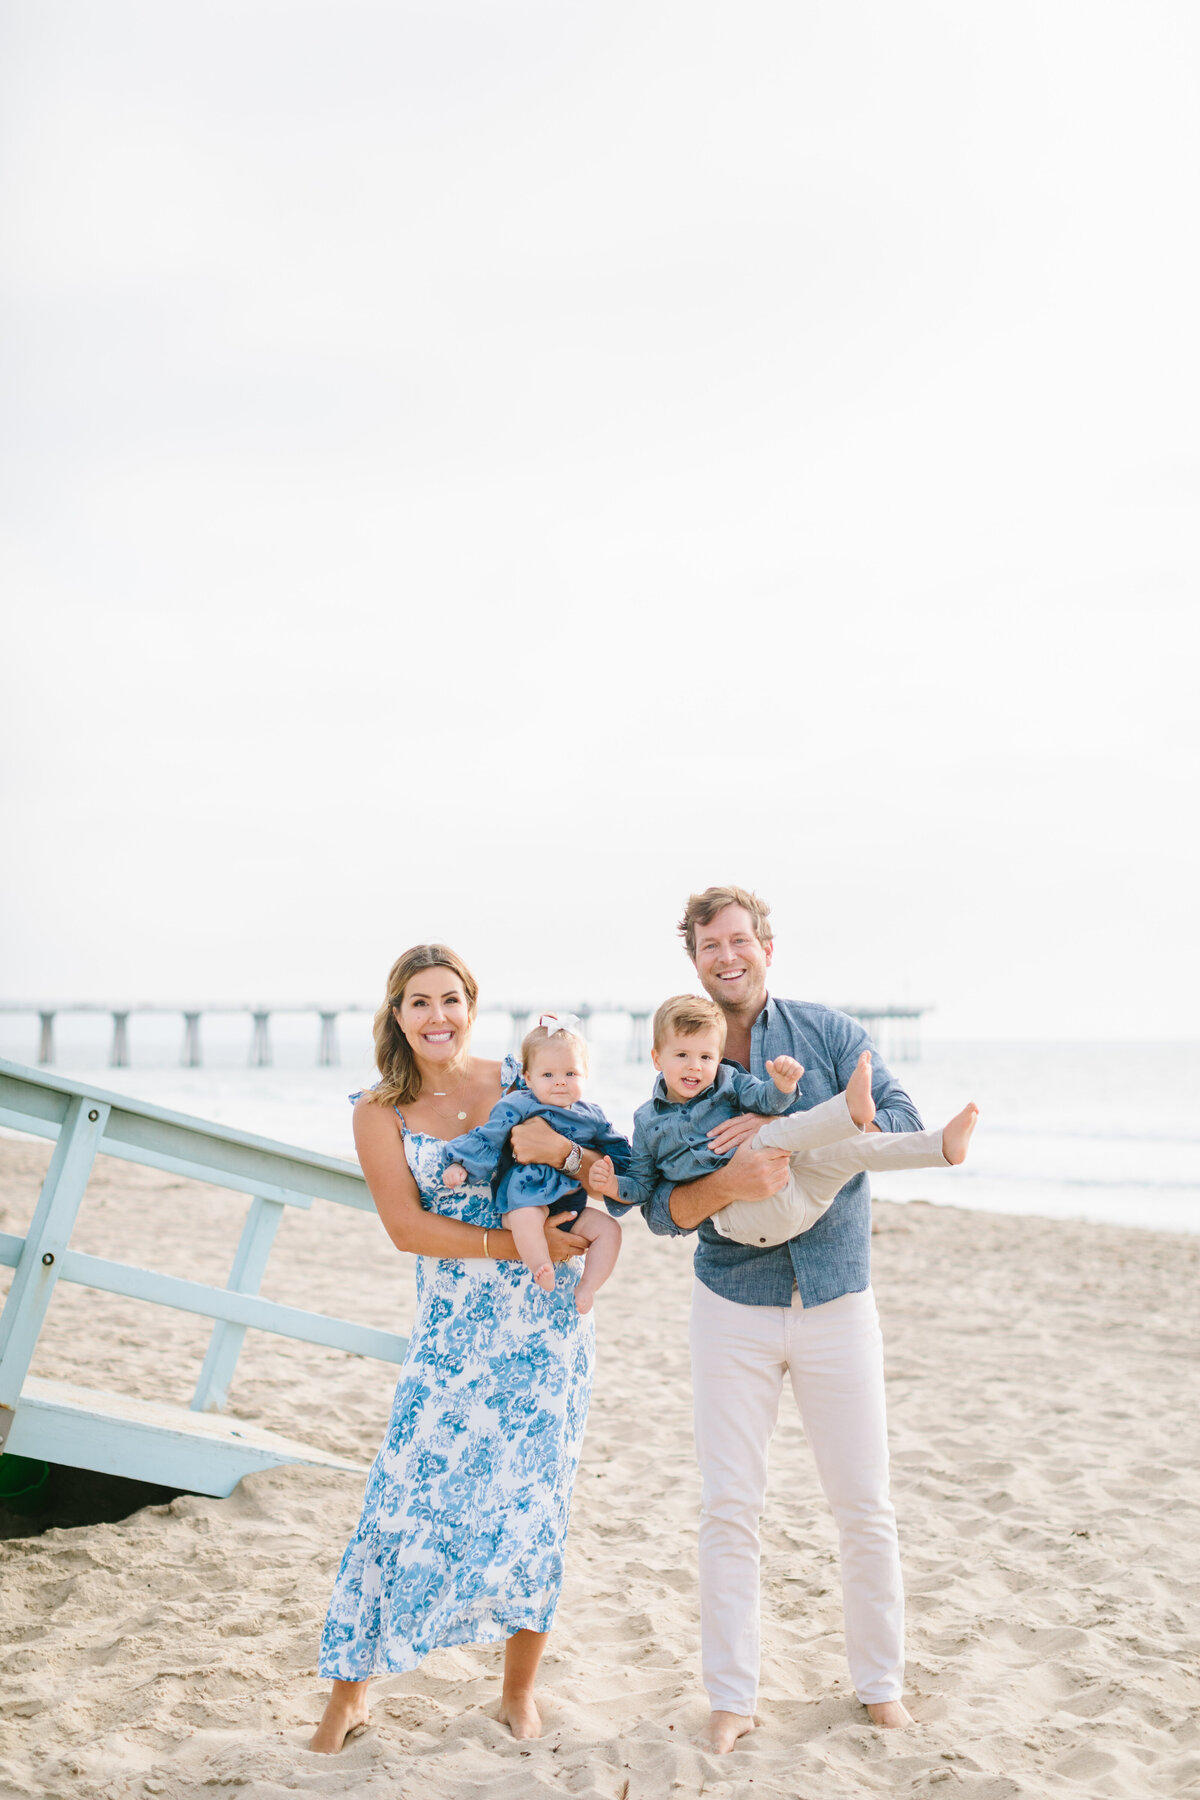 Best California and Texas Family Photographer-Jodee Debes Photography-228